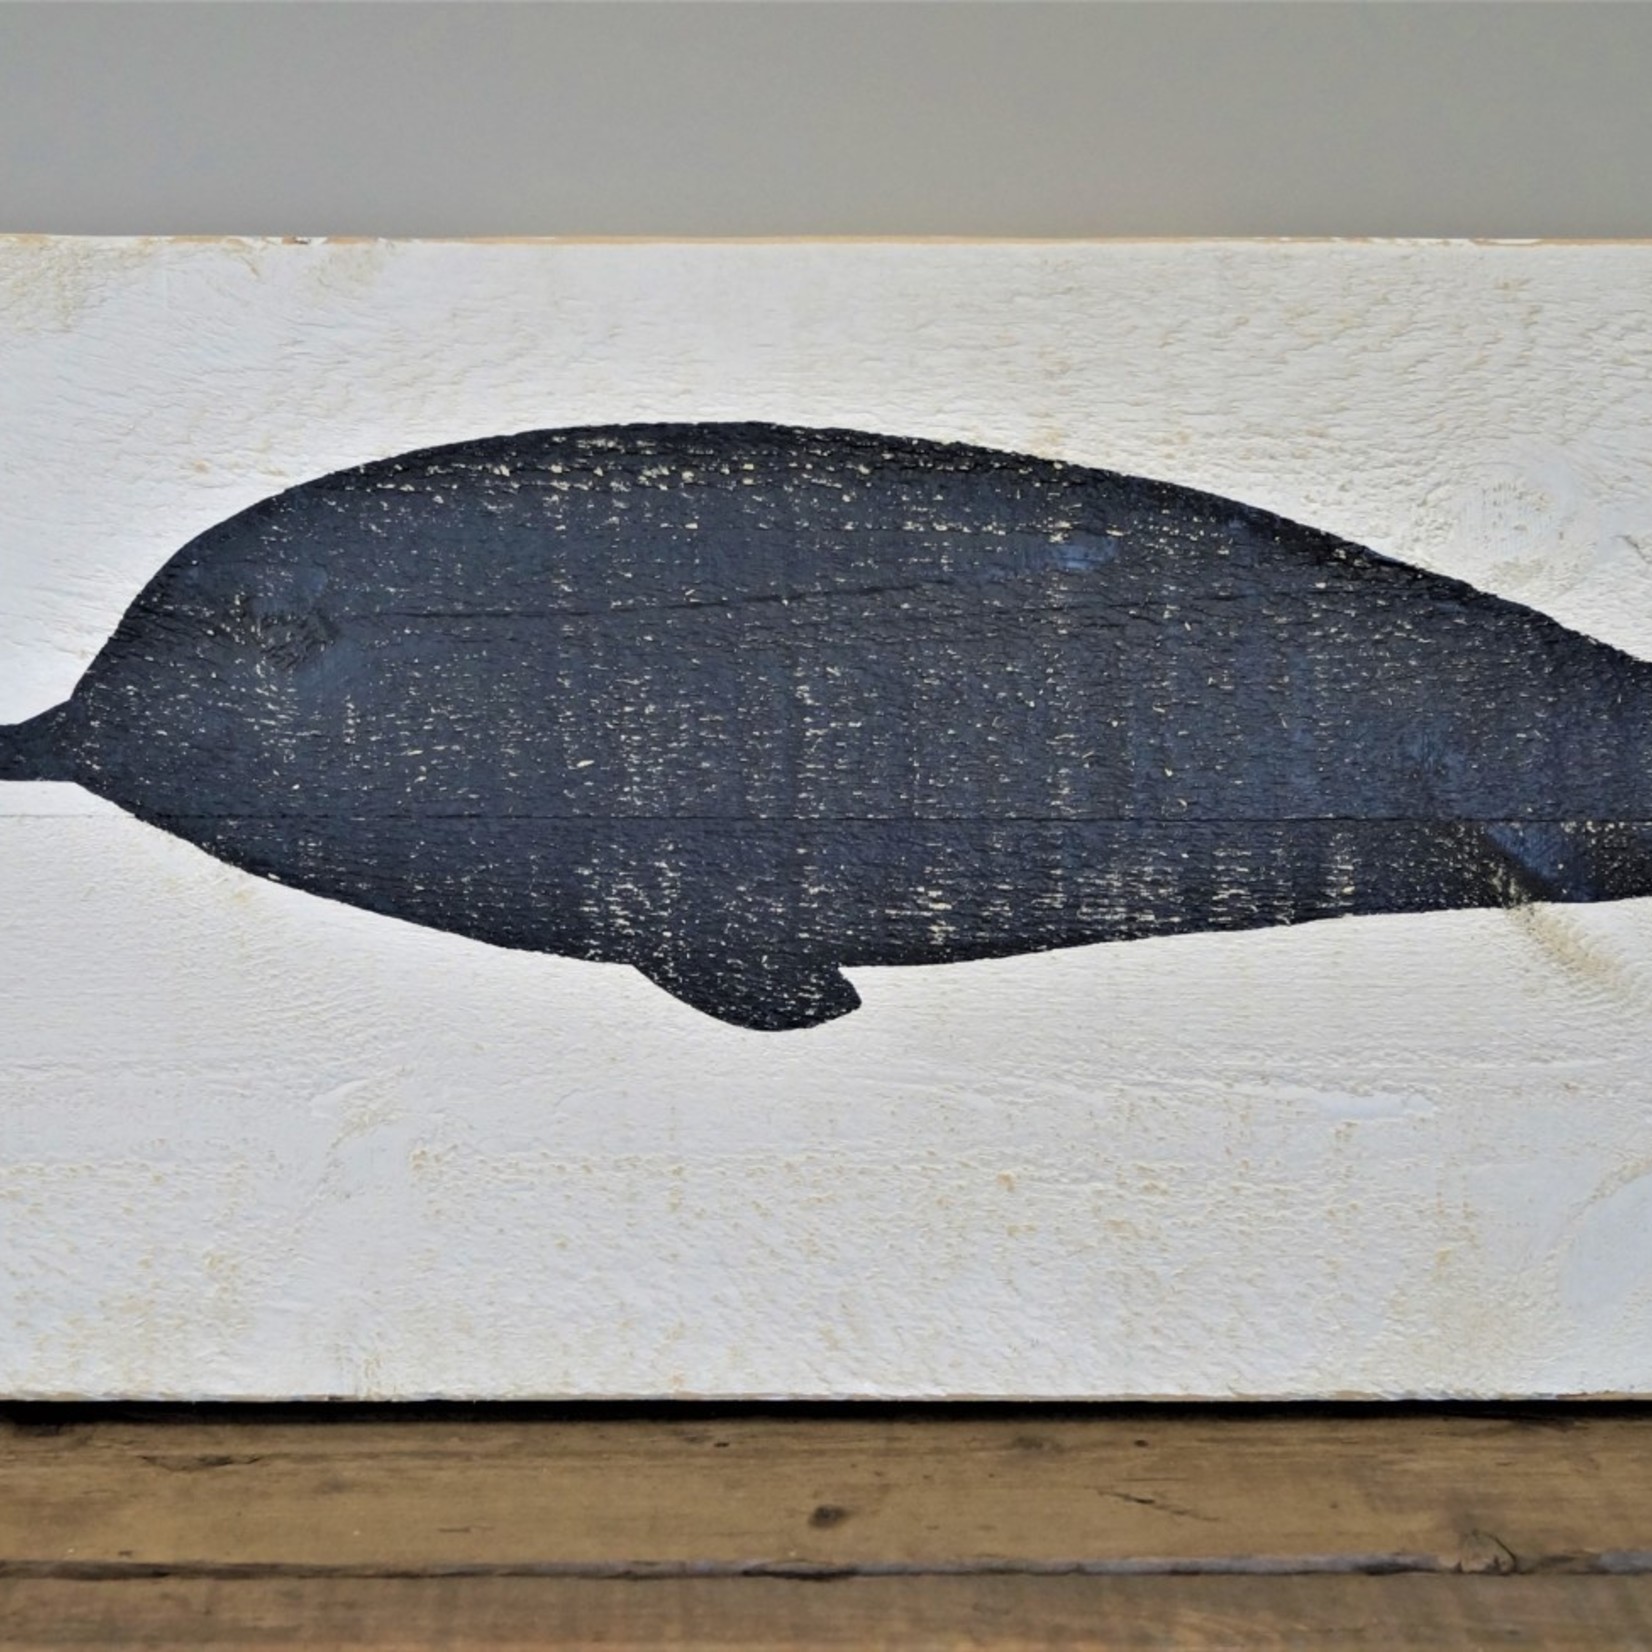 16x40 Narwhal #6 White Board/IS Image